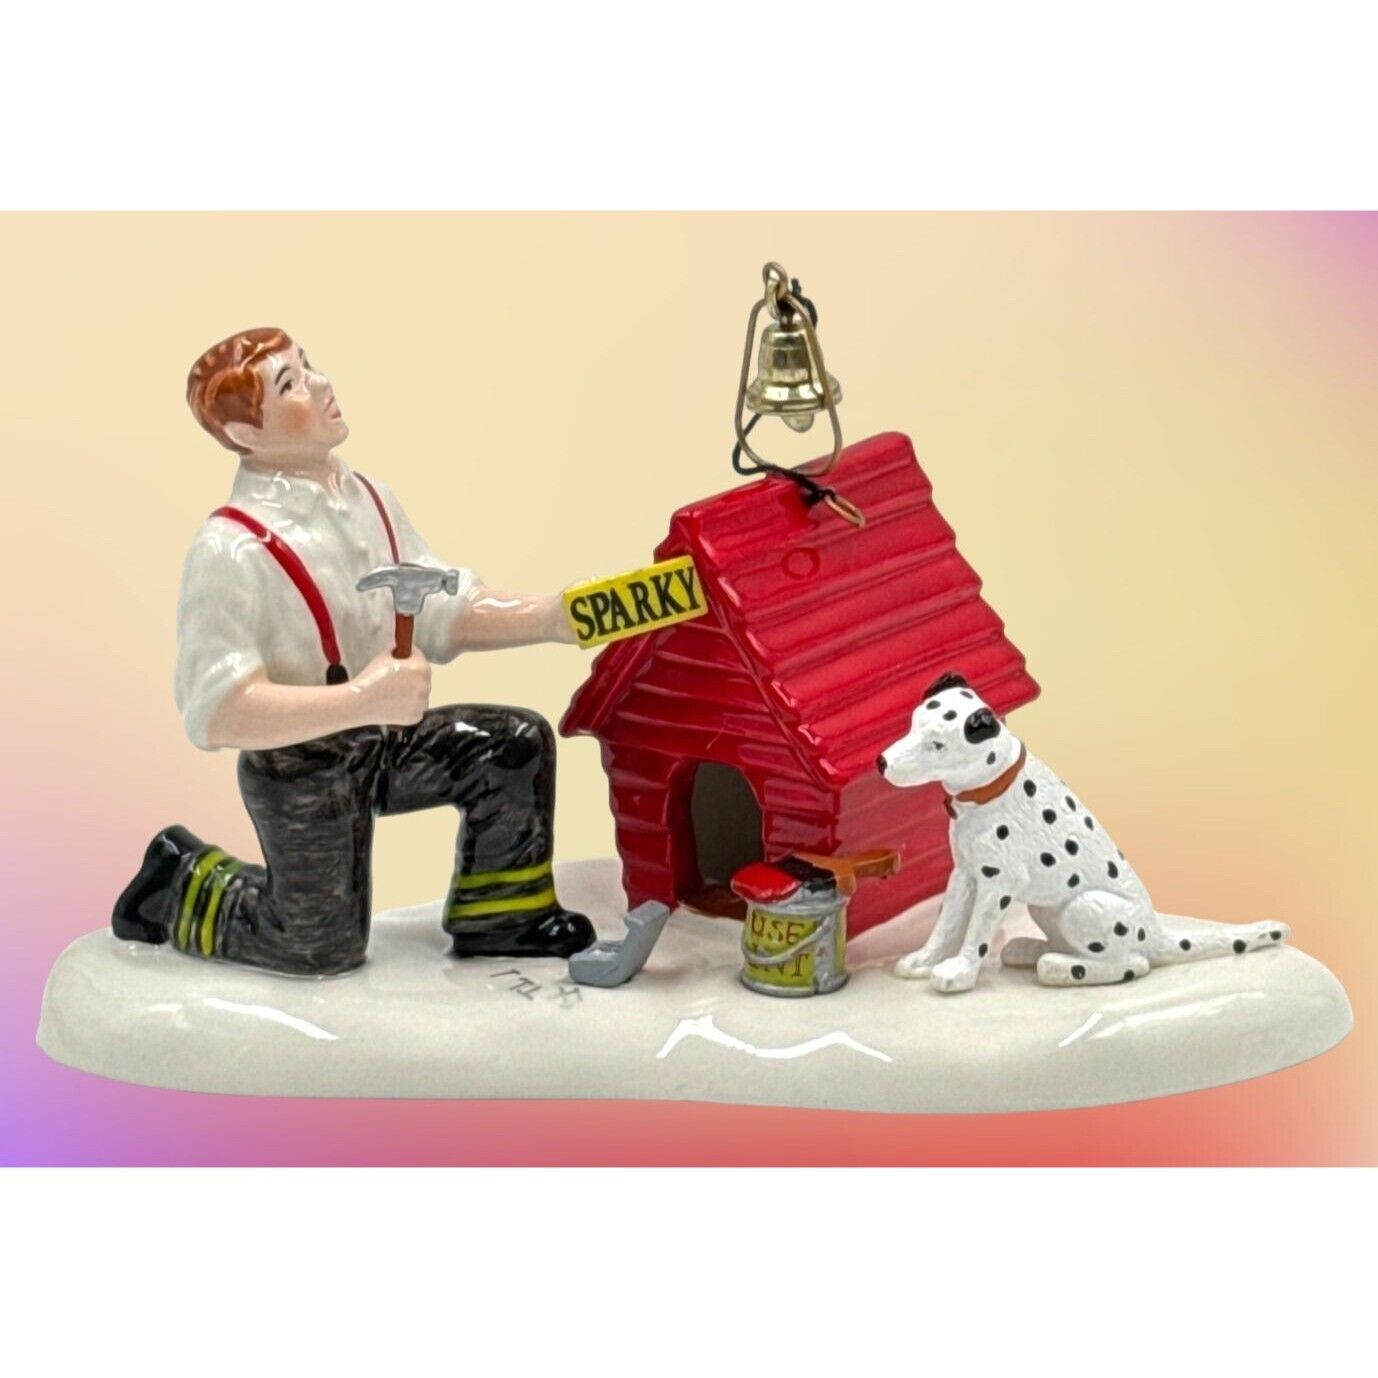 Department 56 Snow Village Sparky\'s New Doghouse Dalmatian Fire House No. 4 Xmas